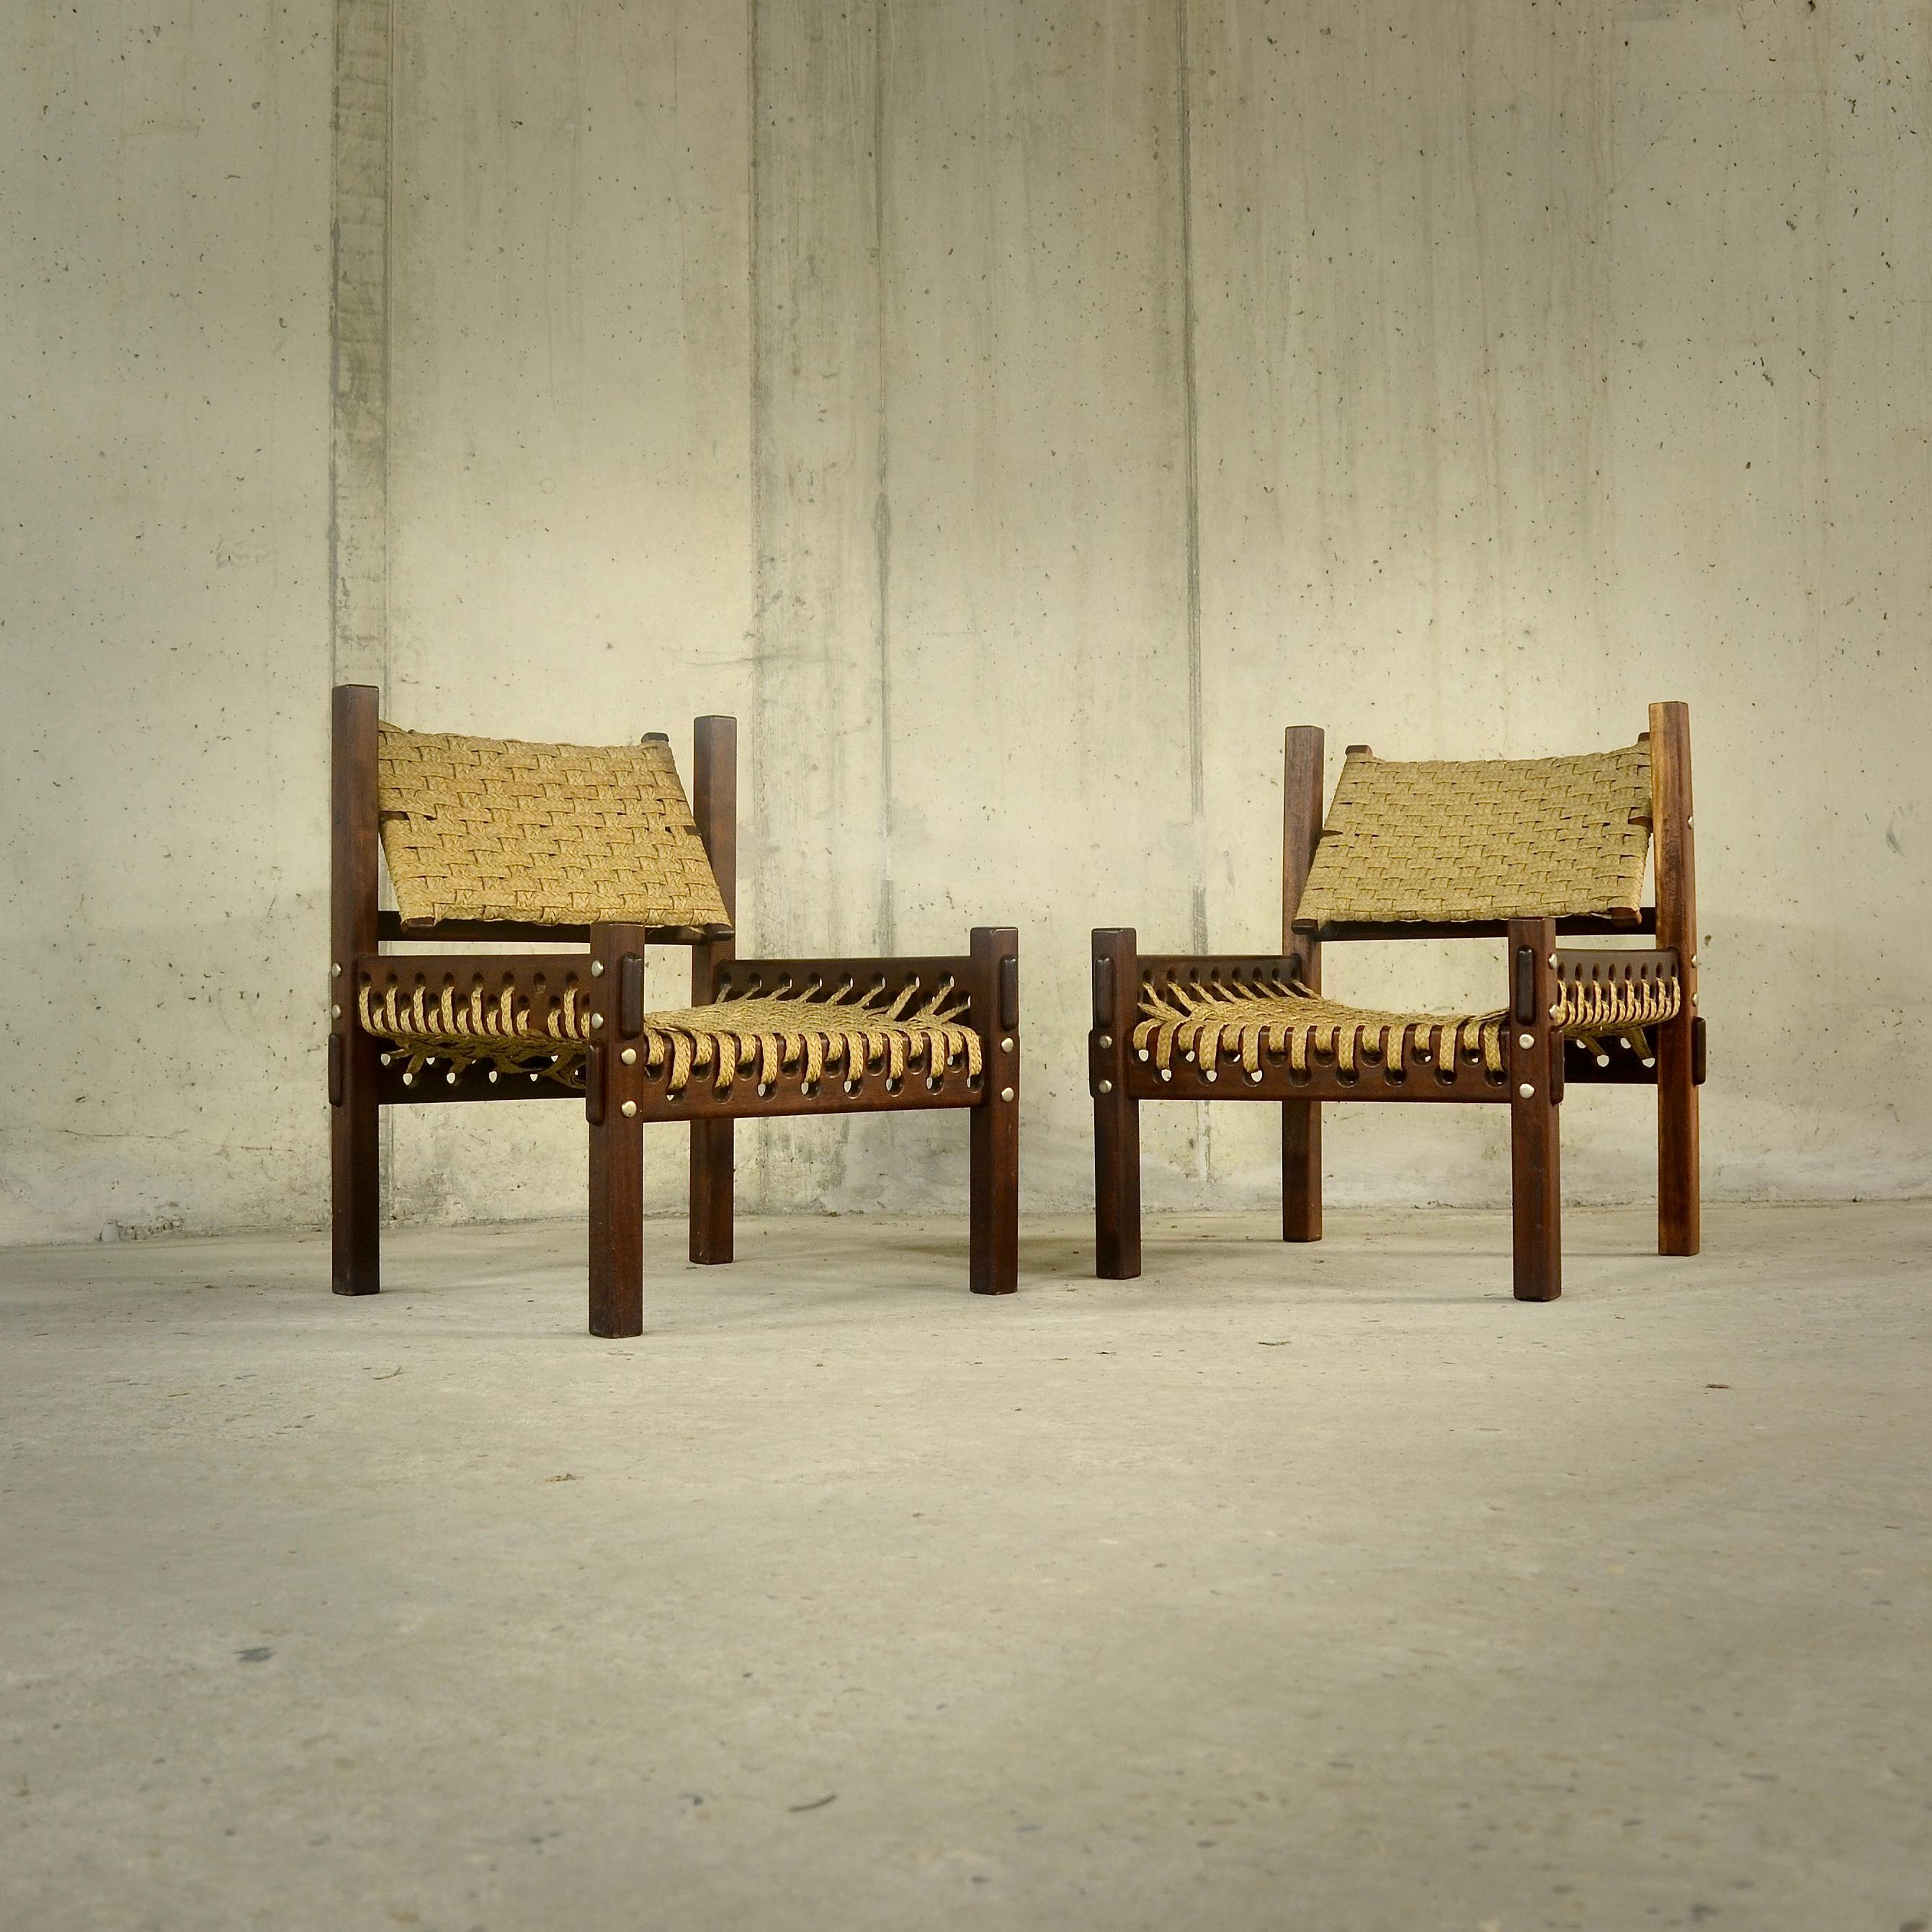 A priori, different influences emanate from the design of these armchairs.

The materials, the use of weaving and the level of finish lead us first to think that these are Scandinavian armchairs, then, looking more closely, the woven palm fiber